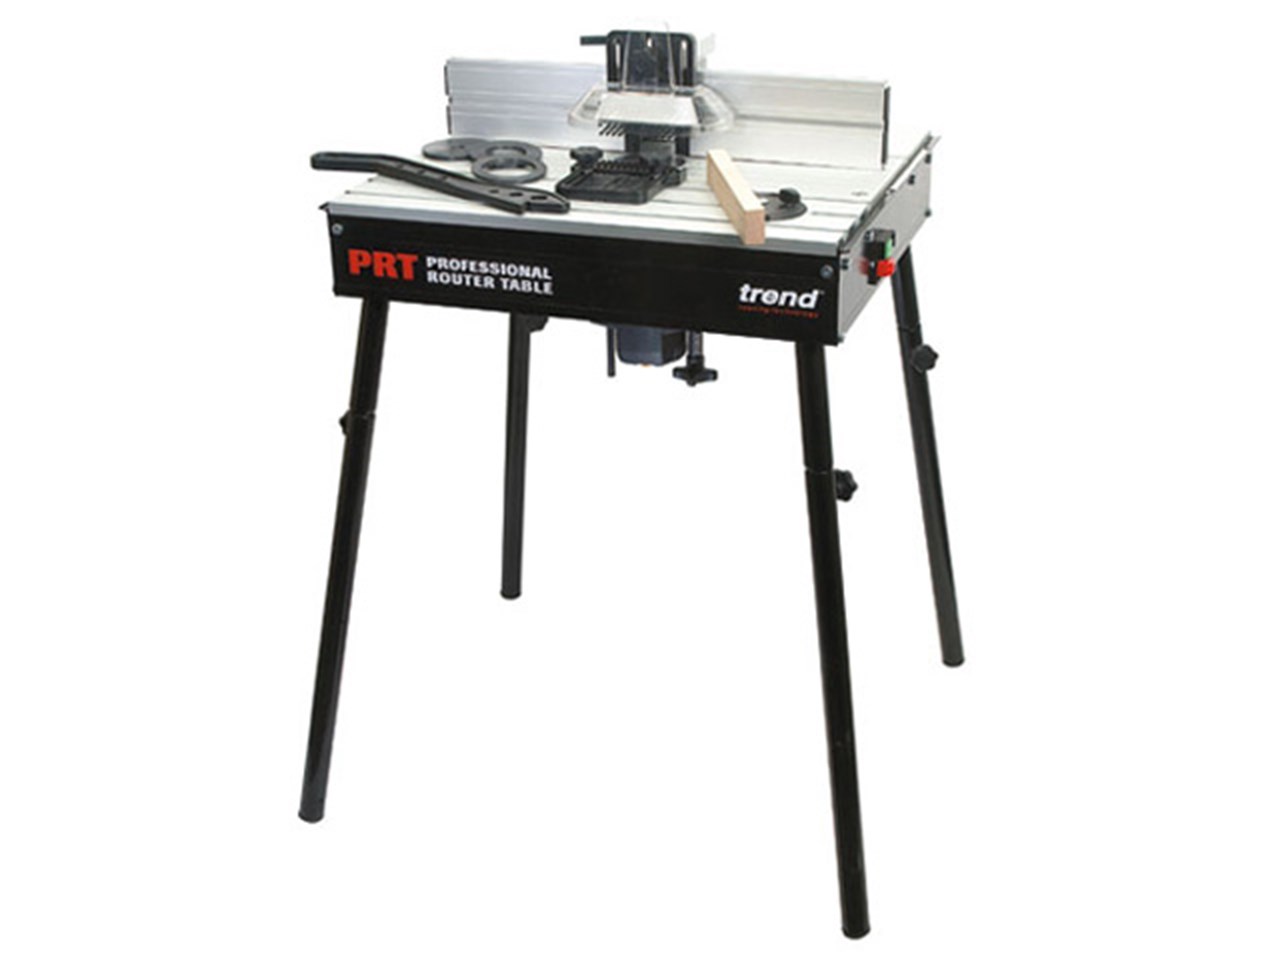 Trend Prt Professional Router Table 240v